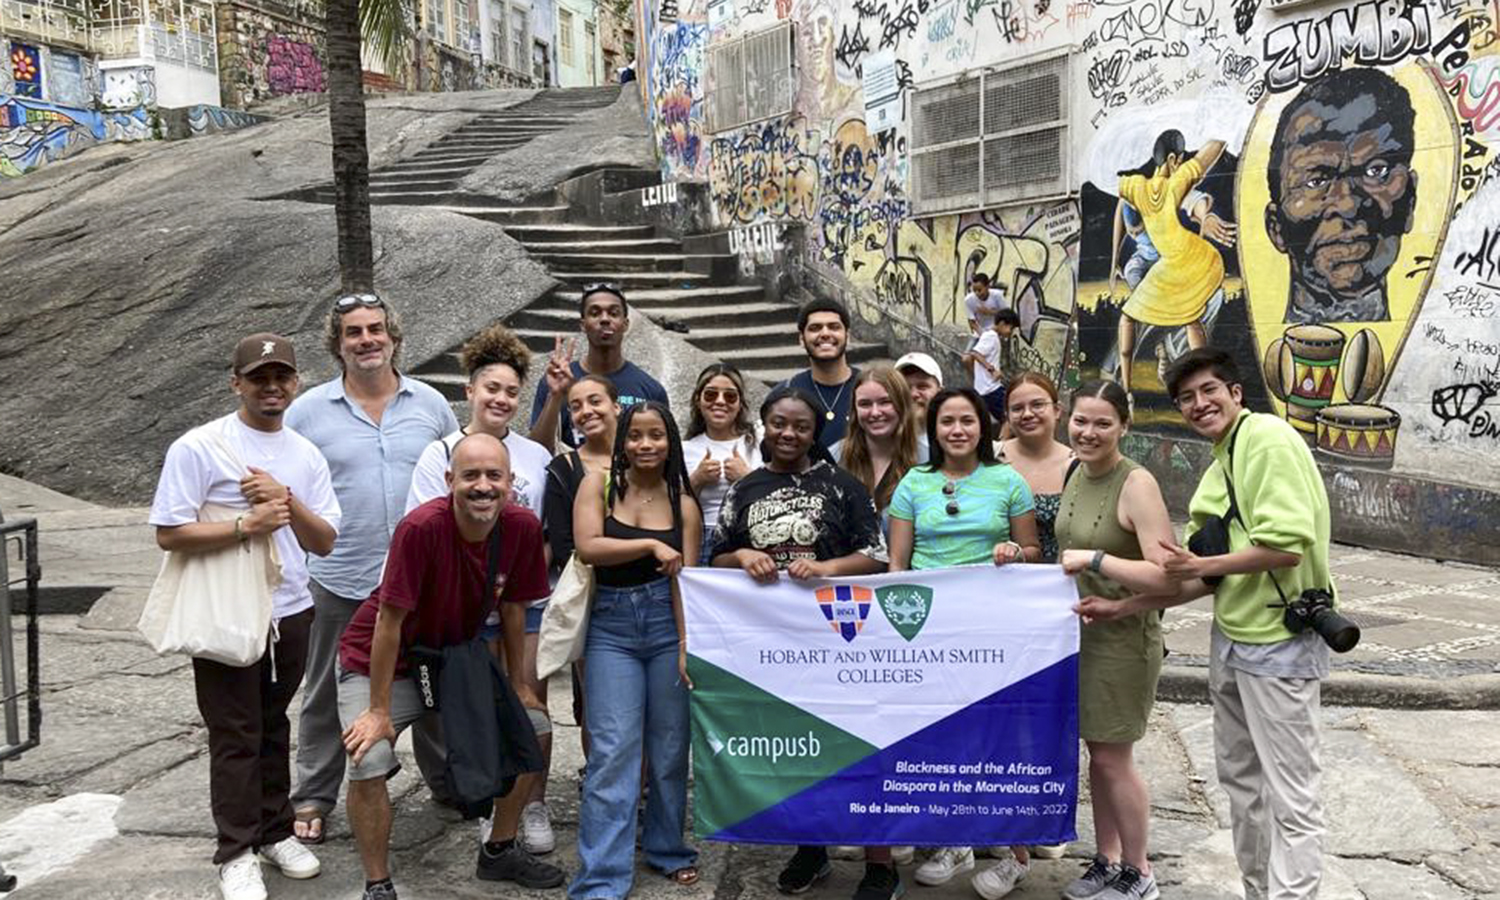 As a leader in experiential education, this week we feature the HWS Centers that allow students to complement their coursework. Here, students gather for a photo while studying in Brazil this summer through a program offered by the Center for Global Education.